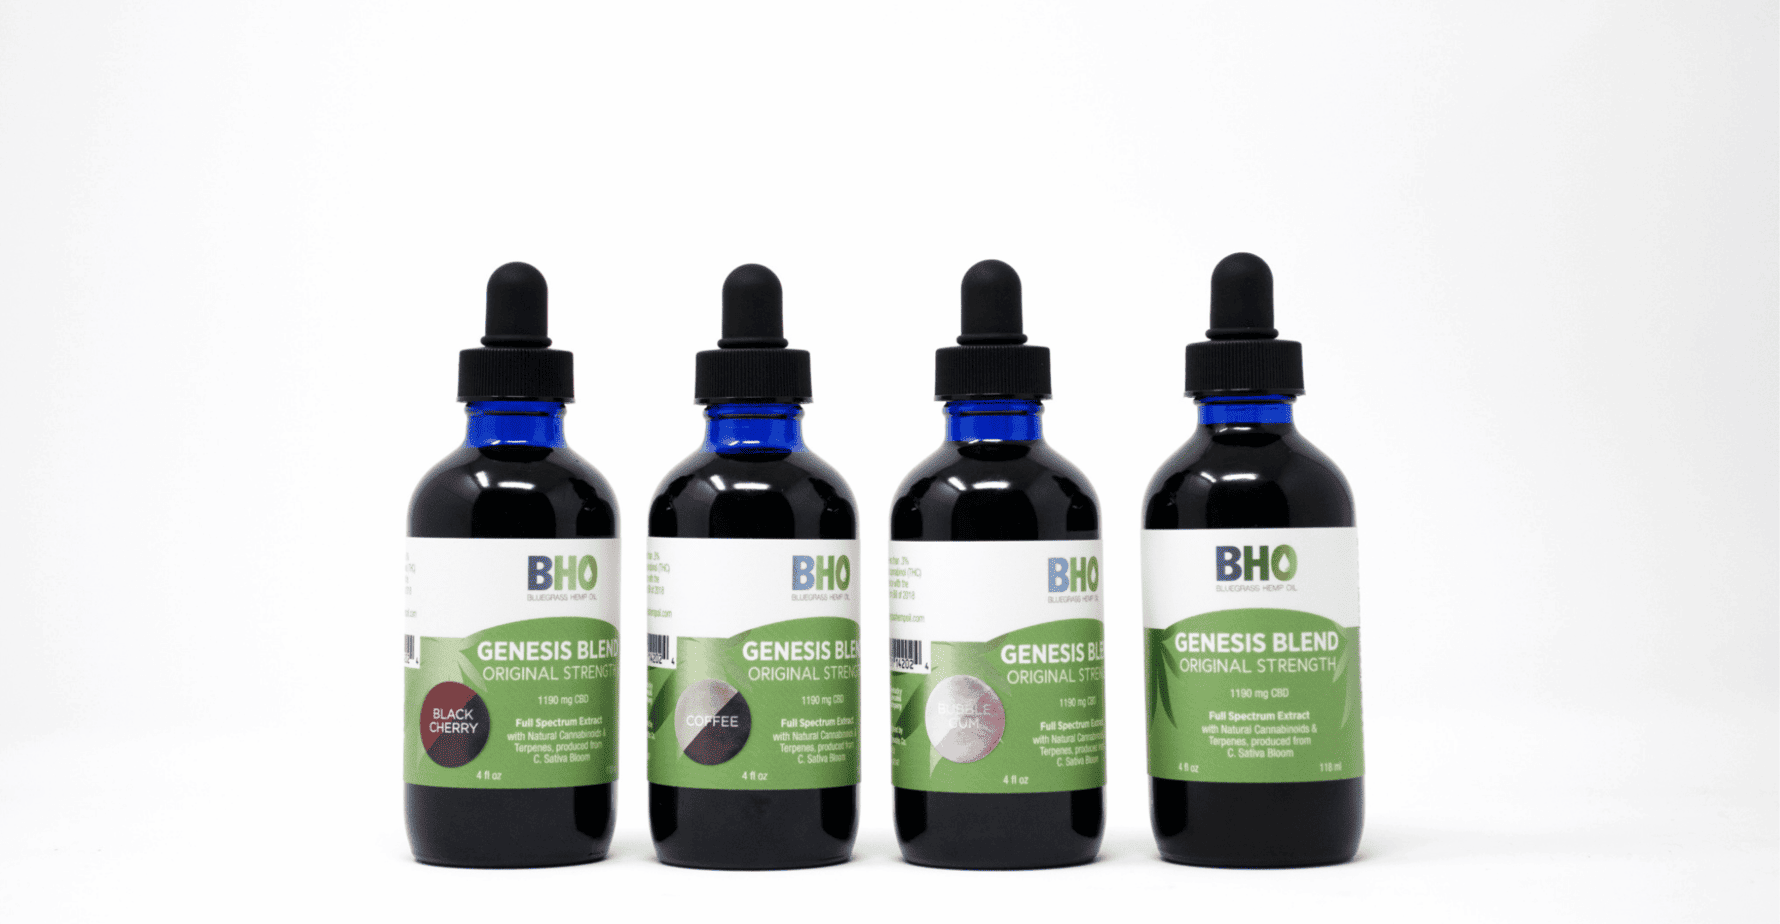 Sample Flavored CBD Extracts from Bluegrass Hemp Oil